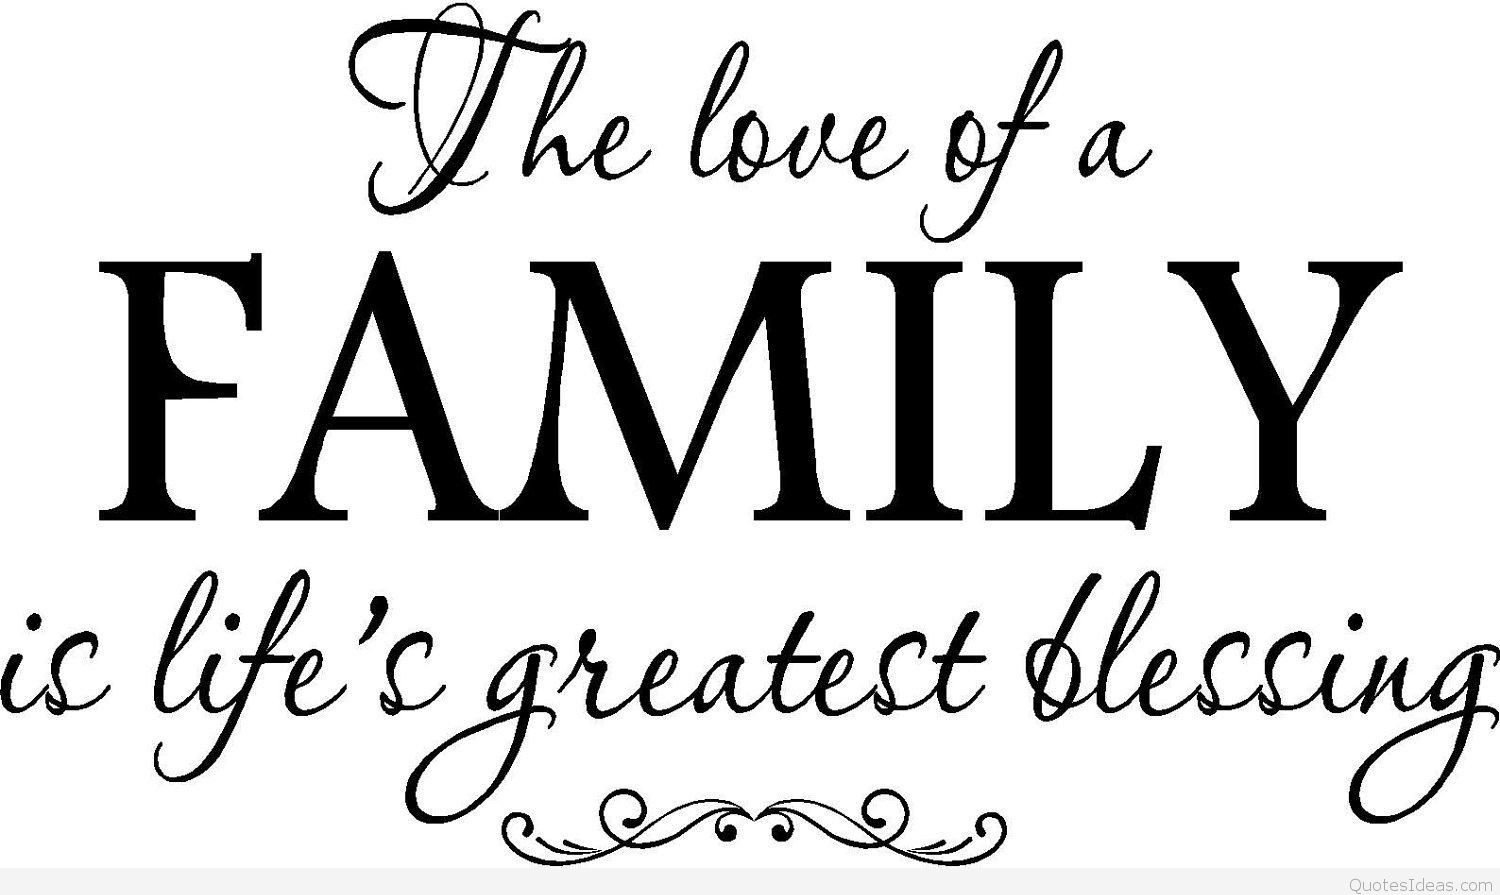 Inspiration Quotes About Family
 Cute cover family quote 2015 inspiring